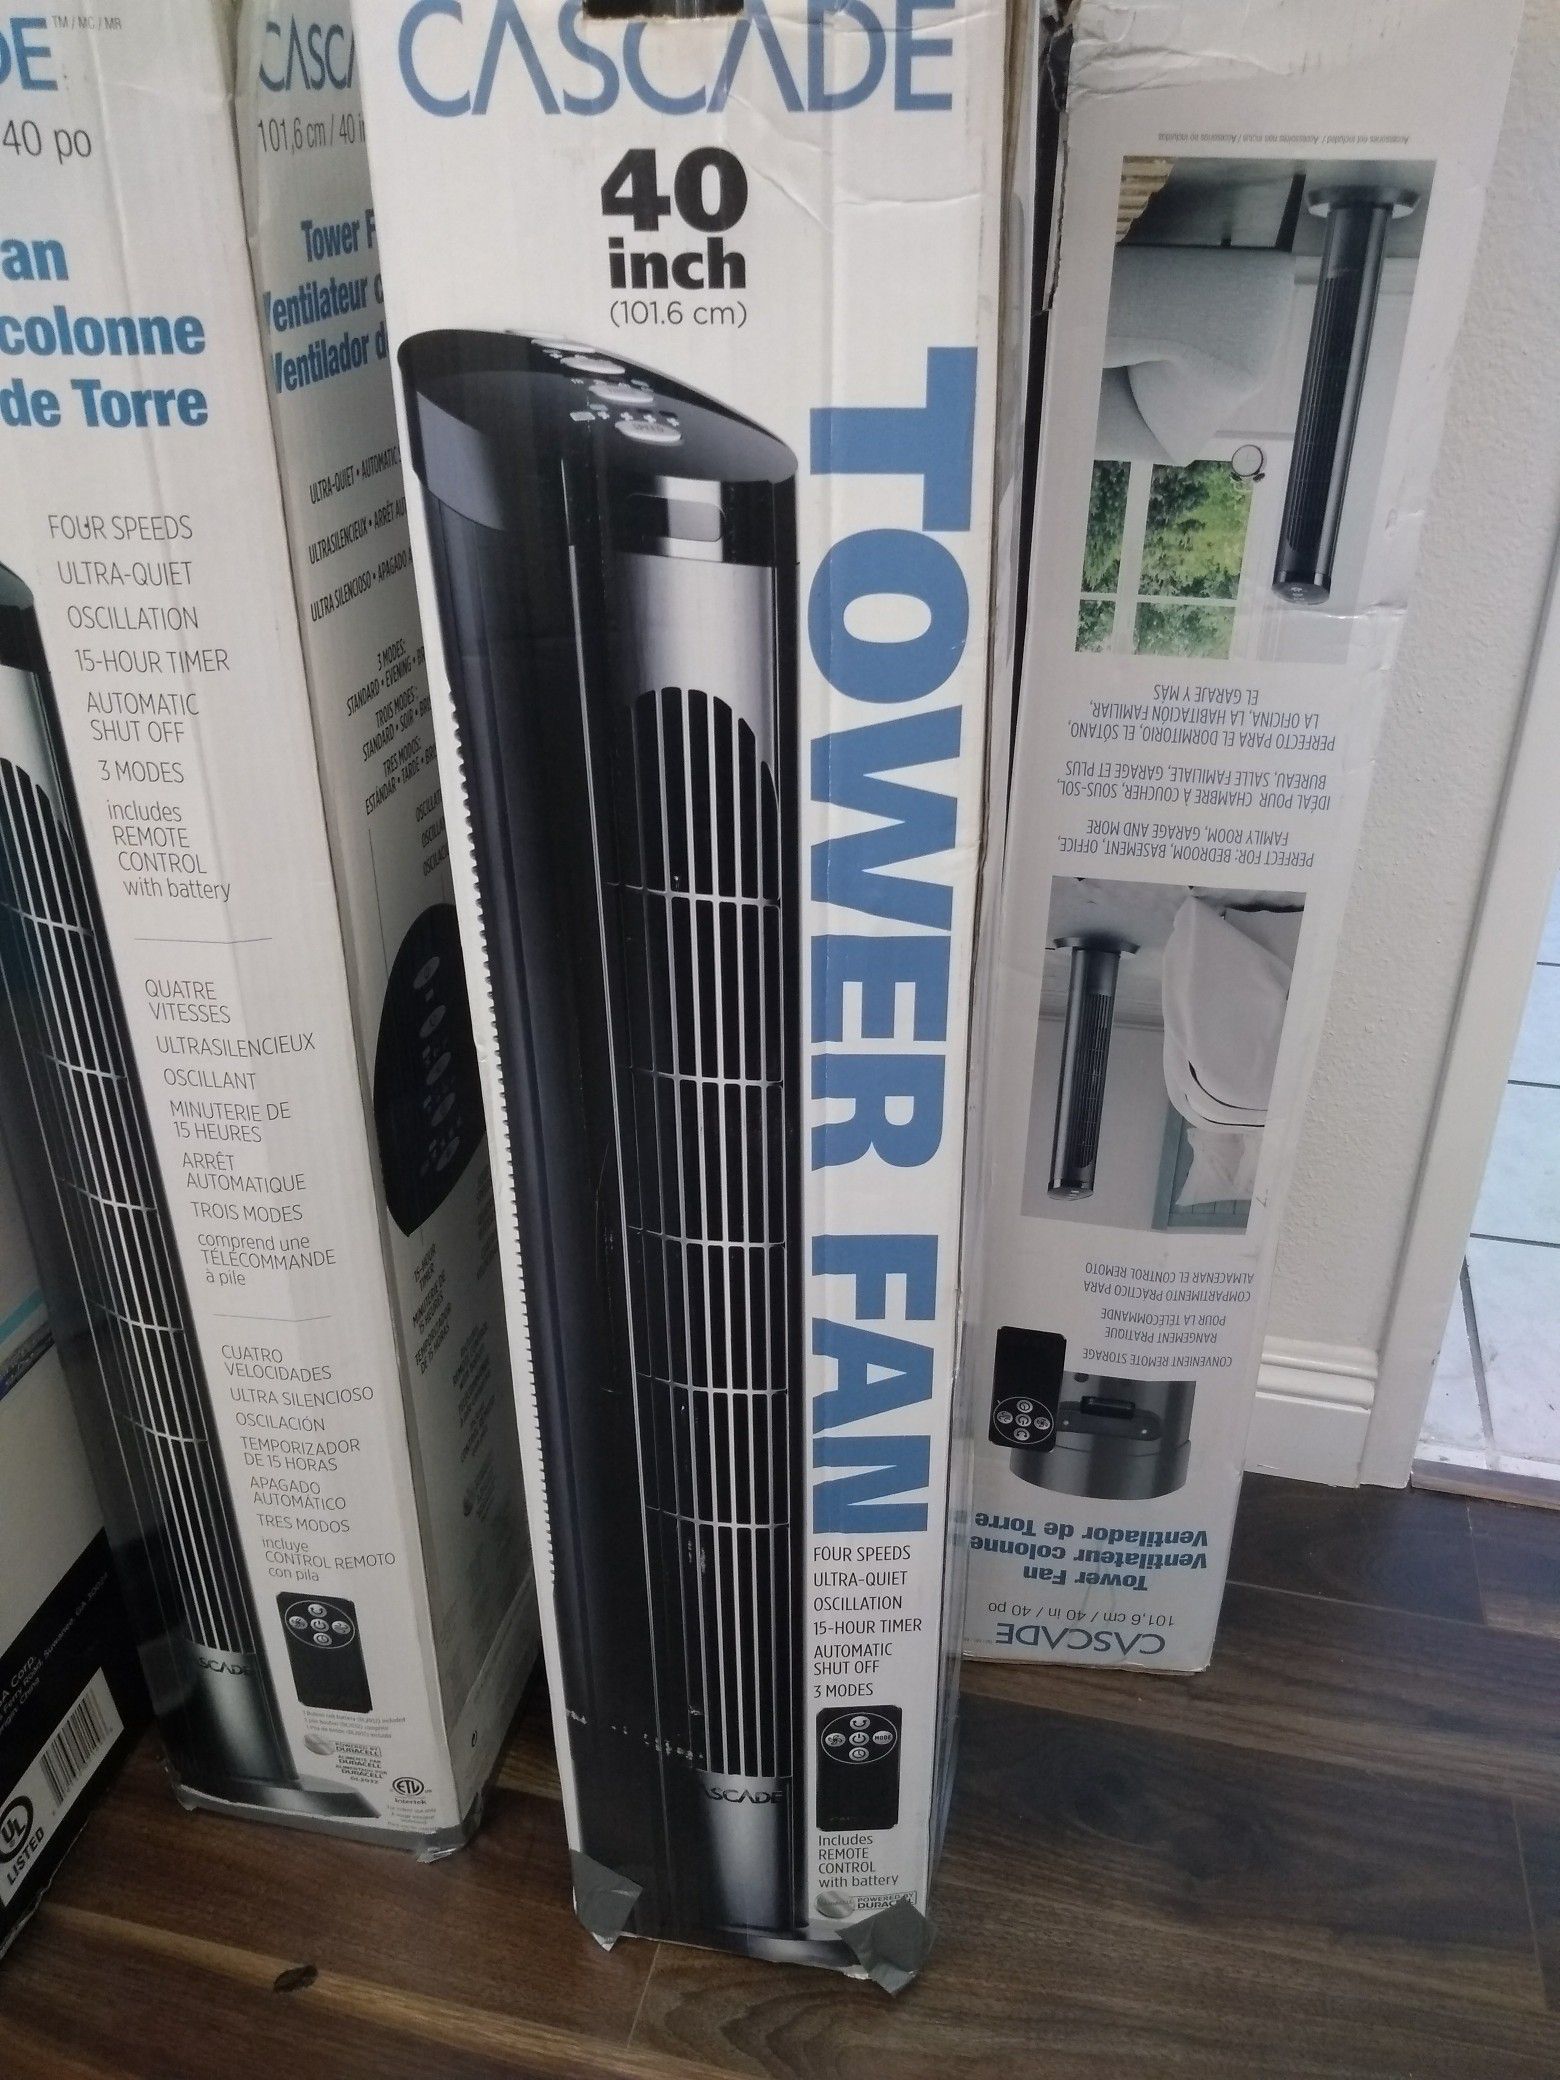 Tower Fan Cascade 40 inch Air Conditioner $30